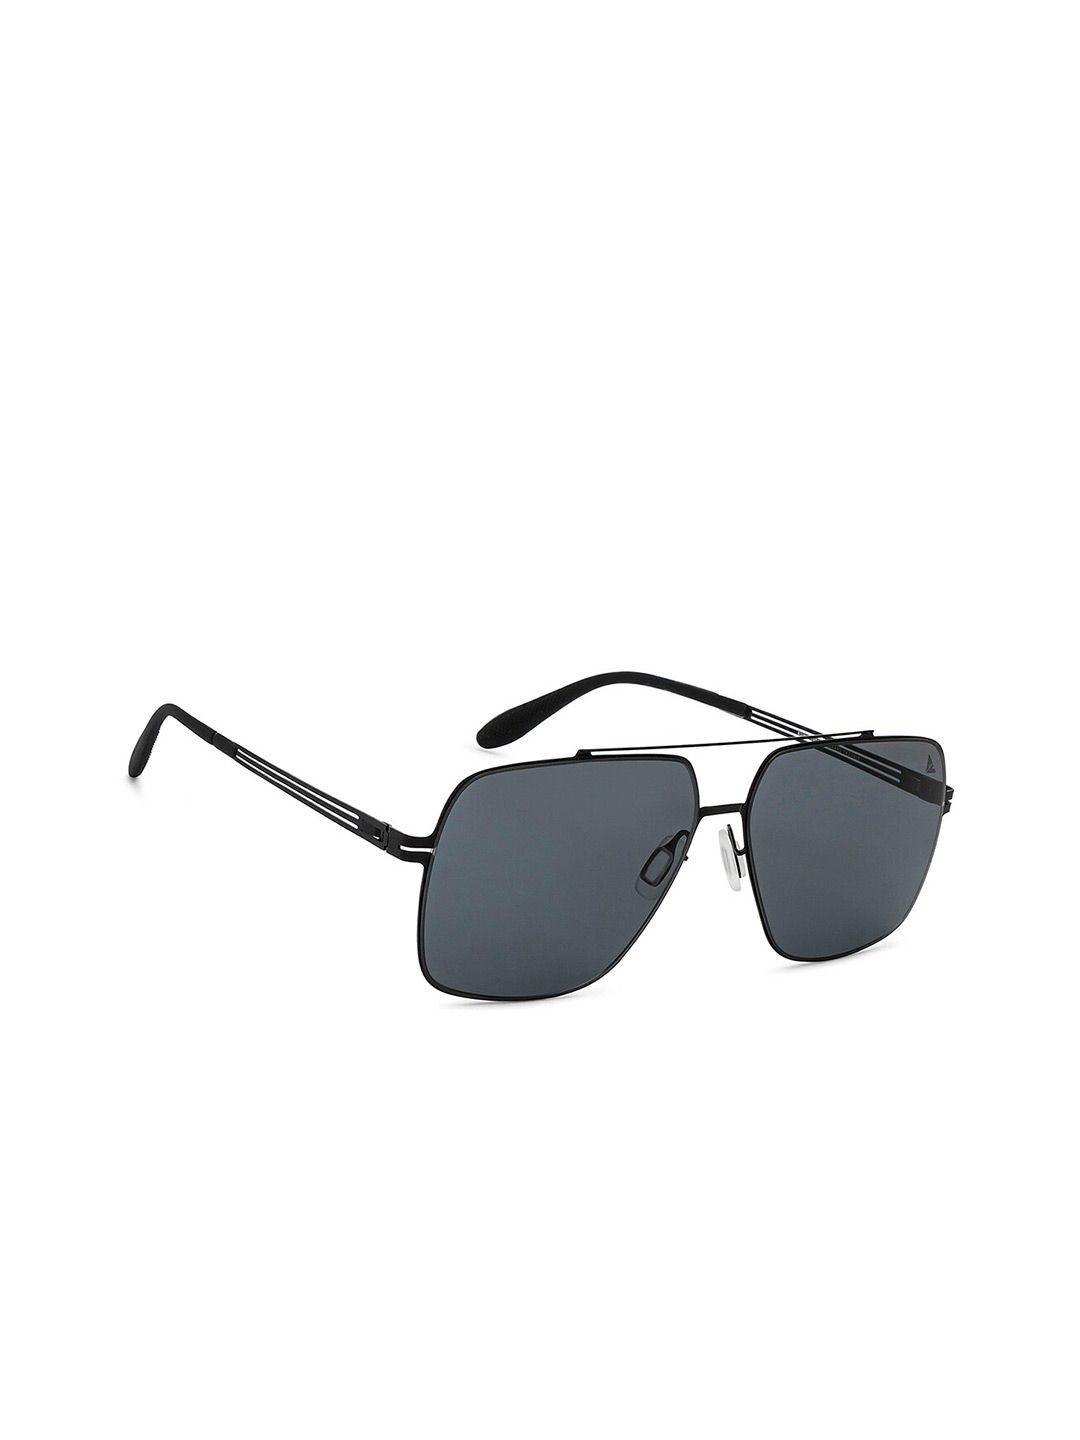 vincent chase unisex other sunglasses with uv protected lens 209349